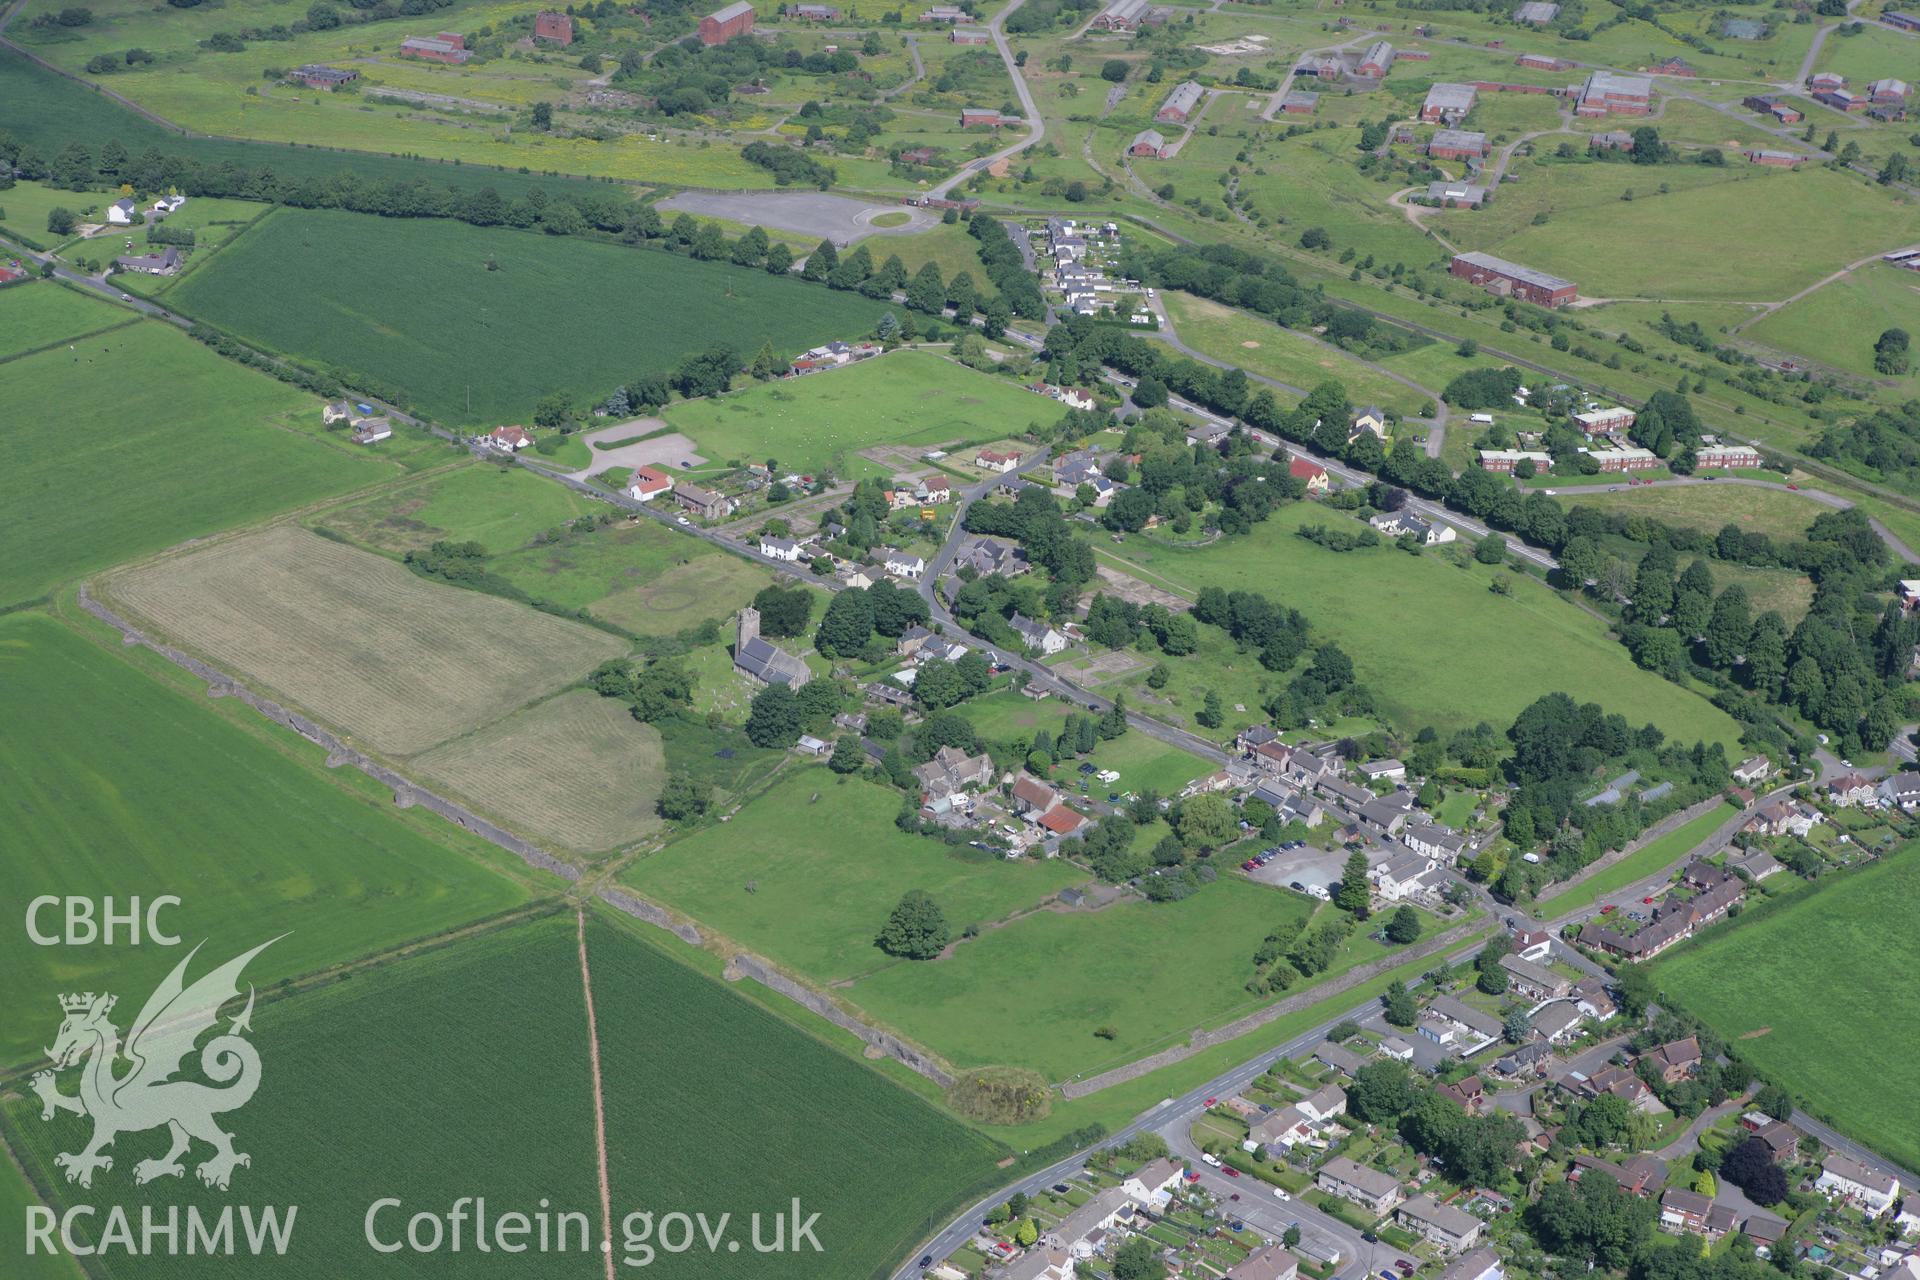 RCAHMW colour oblique photograph of Caerwent Roman City. Taken by Toby Driver on 21/07/2008.